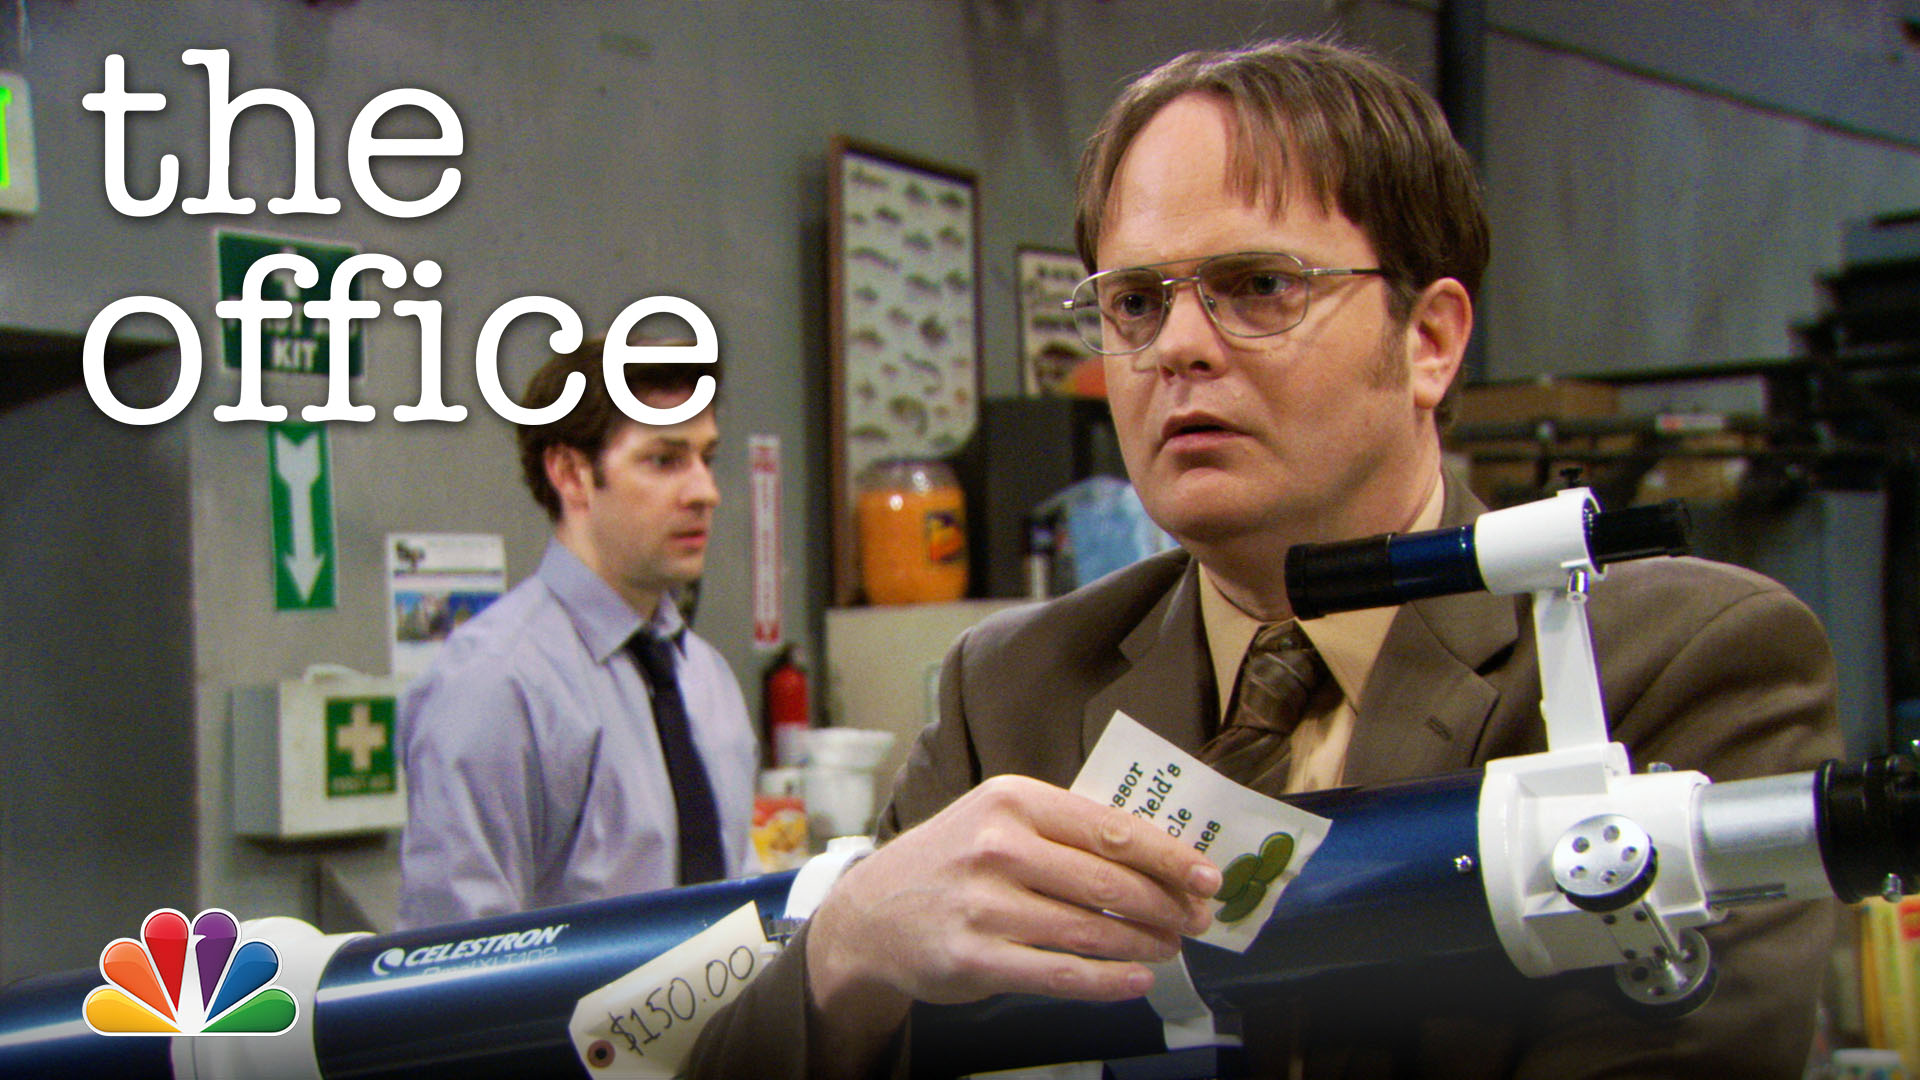 Watch The Office Web Exclusive: Jim Pranks Dwight with Magic Beans - The Of...